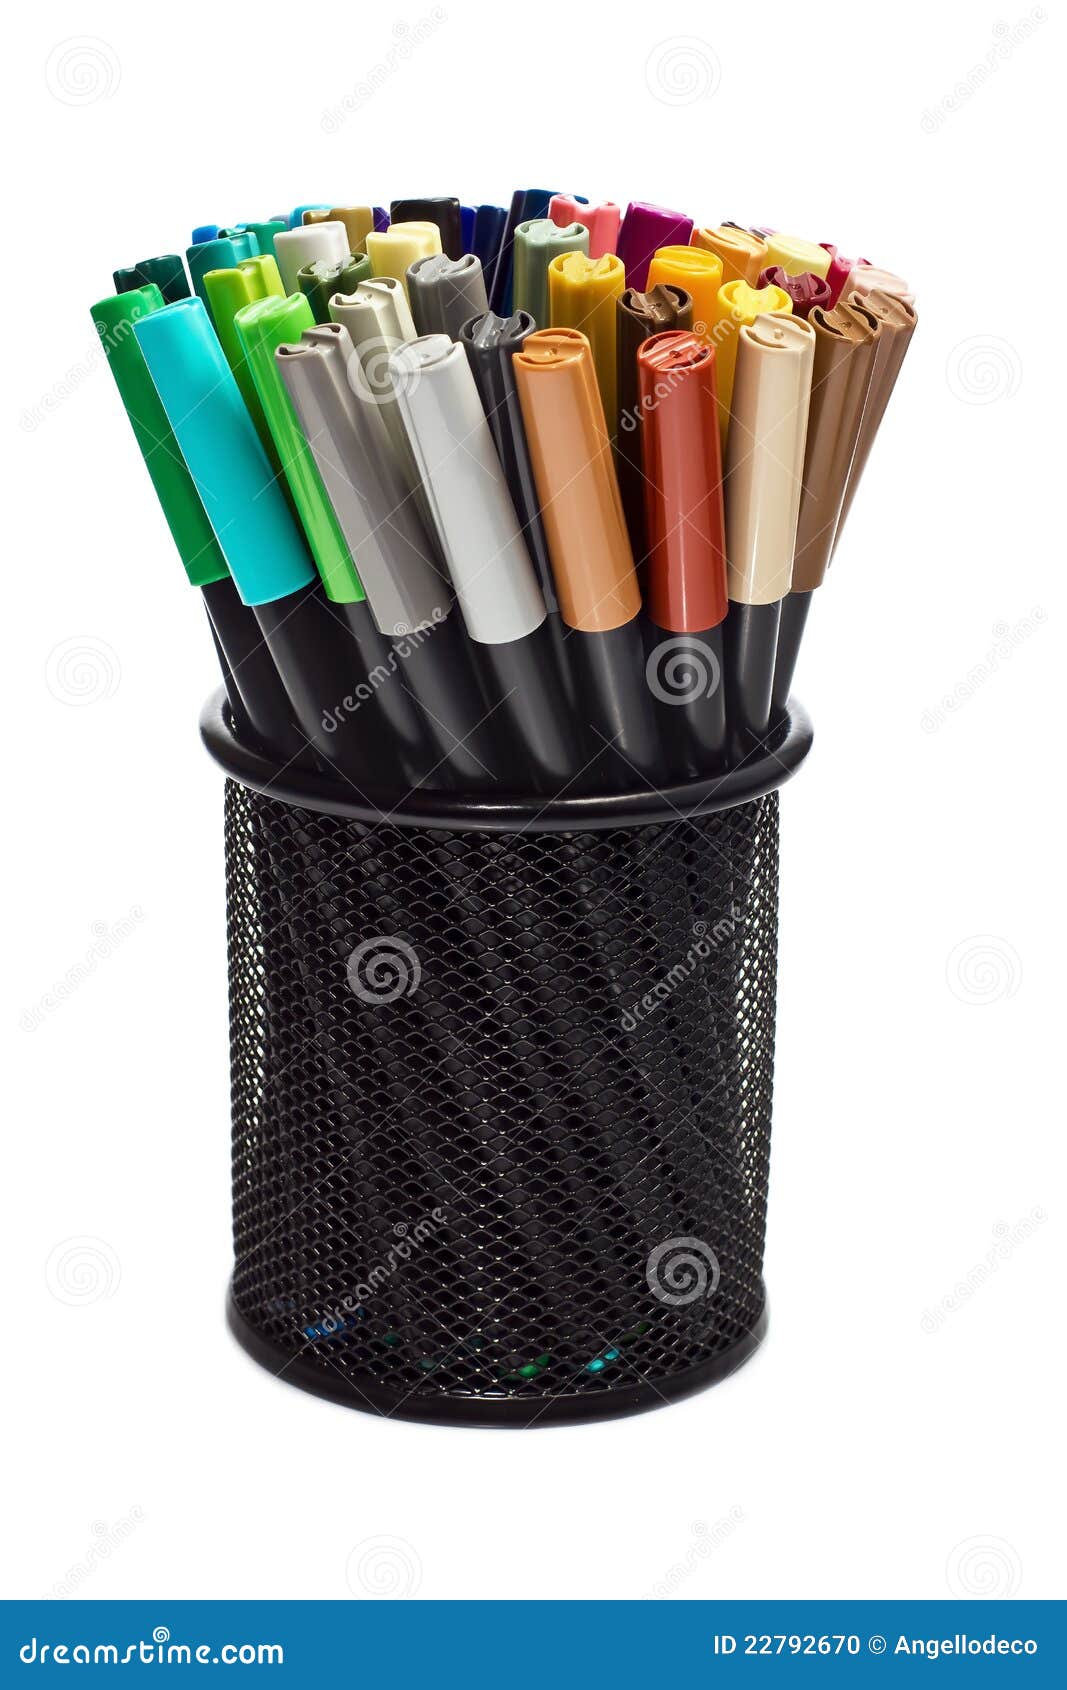 markers in pencil holder